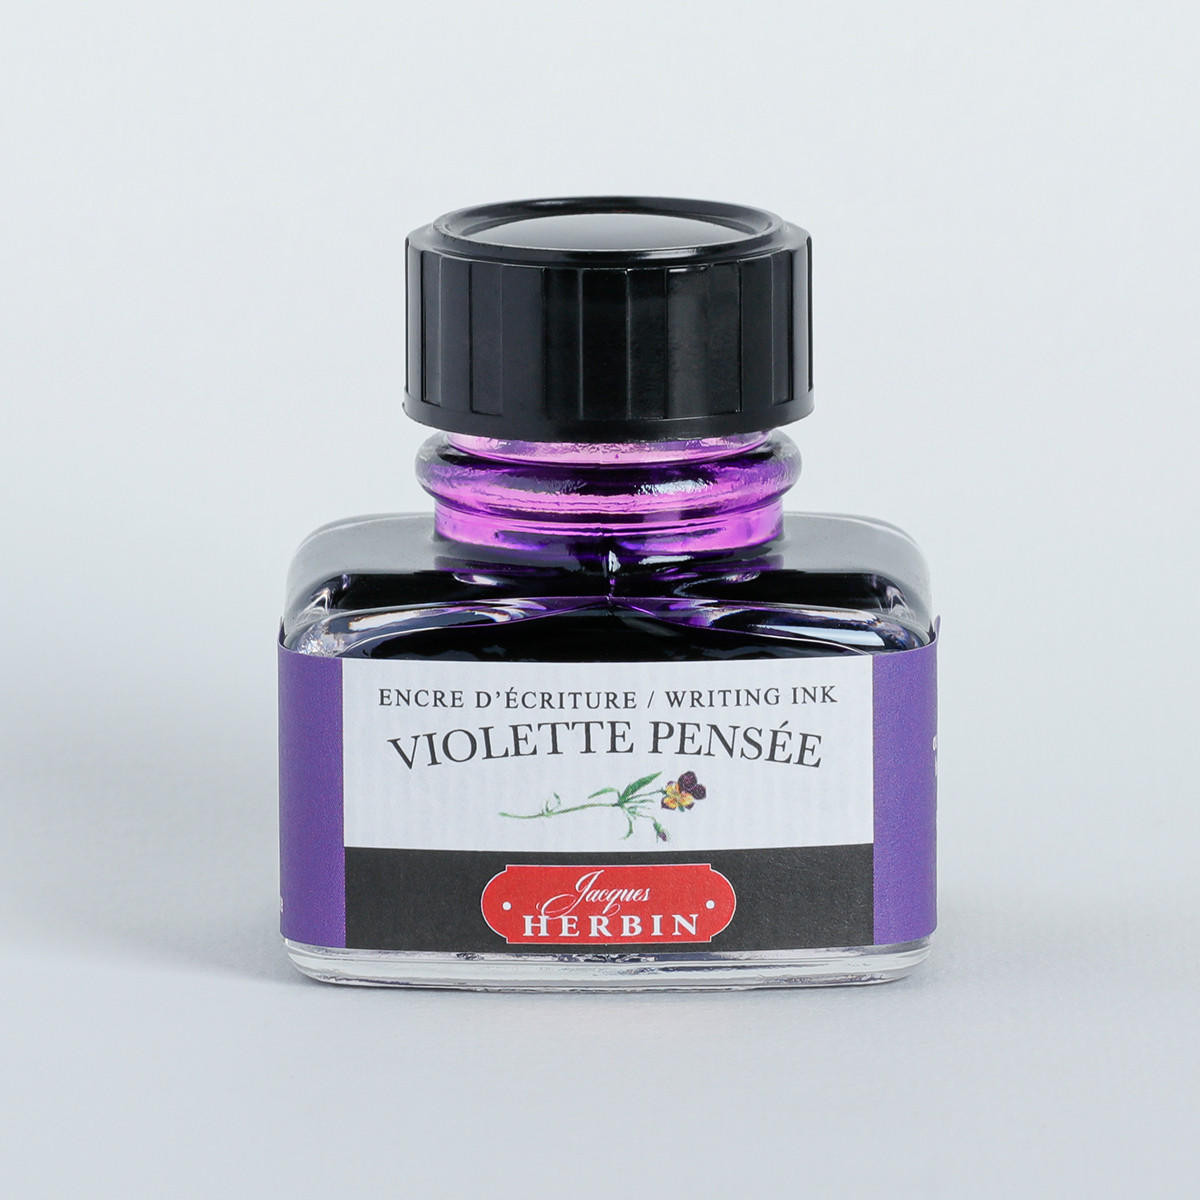 Herbin ’D’ Writing and Drawing Ink 30ml Violette Pensee